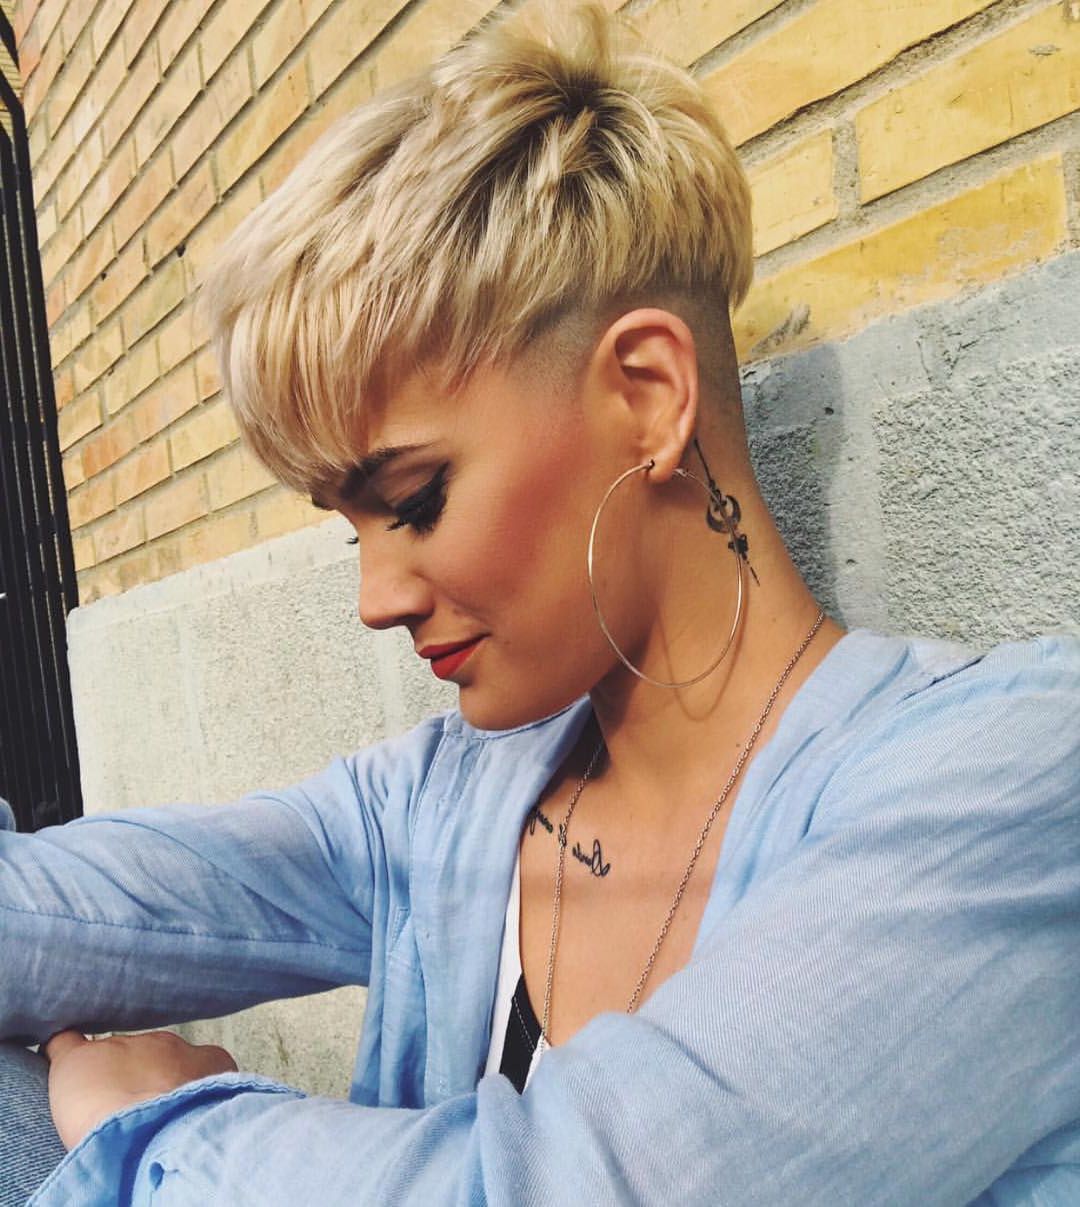 10 Stylish Pixie Haircuts – Women Short Undercut Hairstyles 2018 – 2019 For Curly Pixie Hairstyles With V Cut Nape (View 15 of 20)